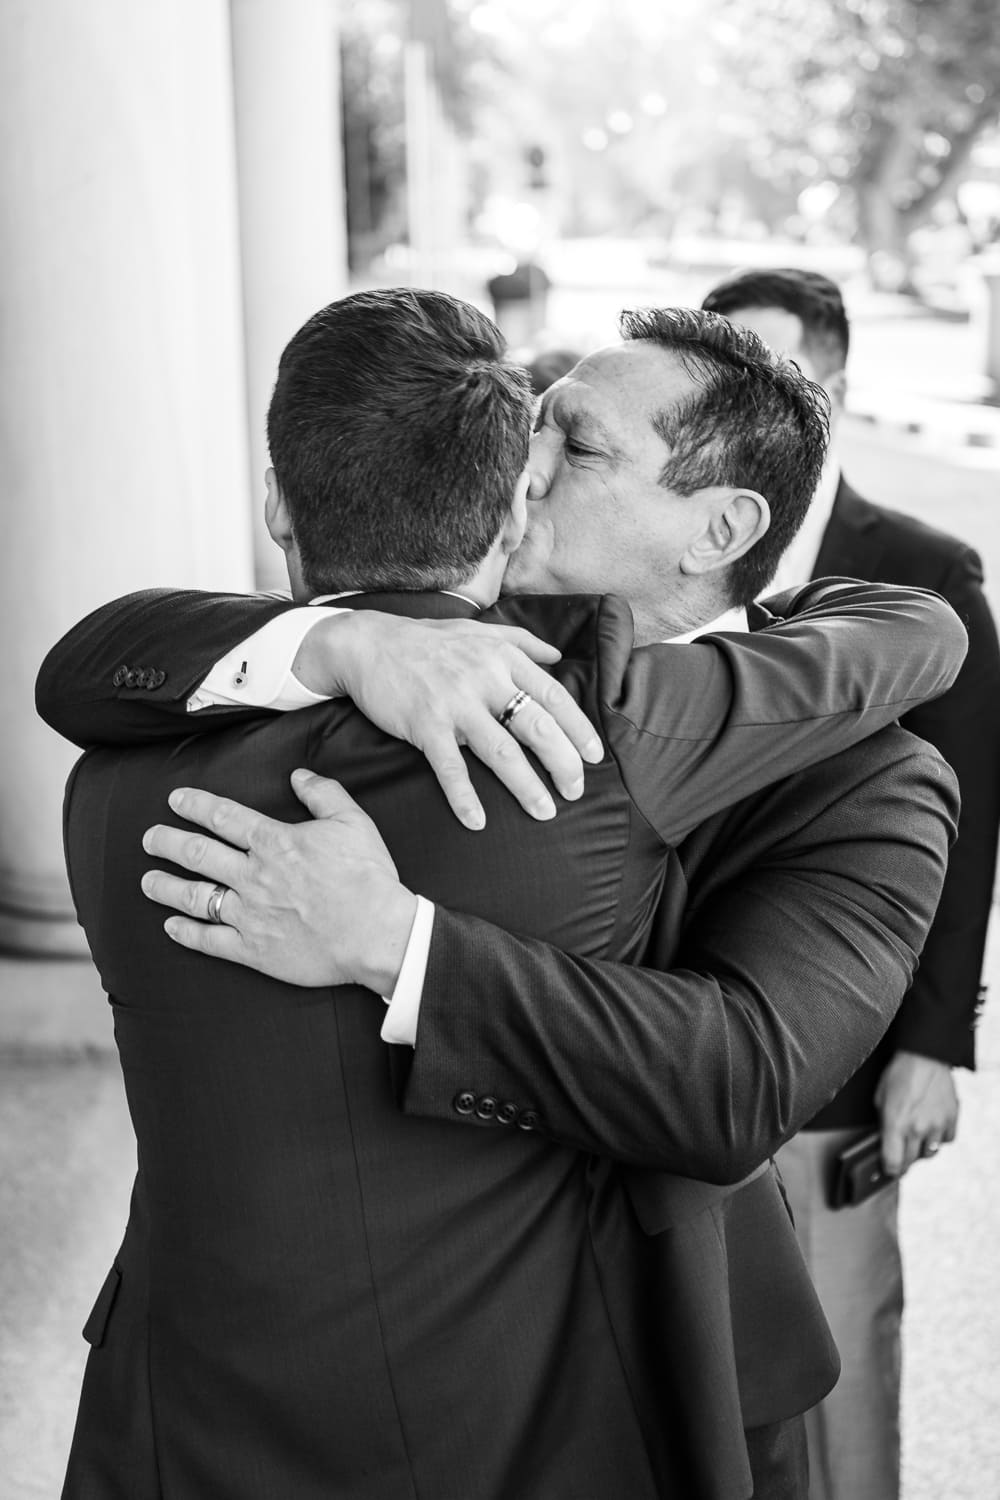 Father of groom gives kiss on cheek after emotional wedding ceremony